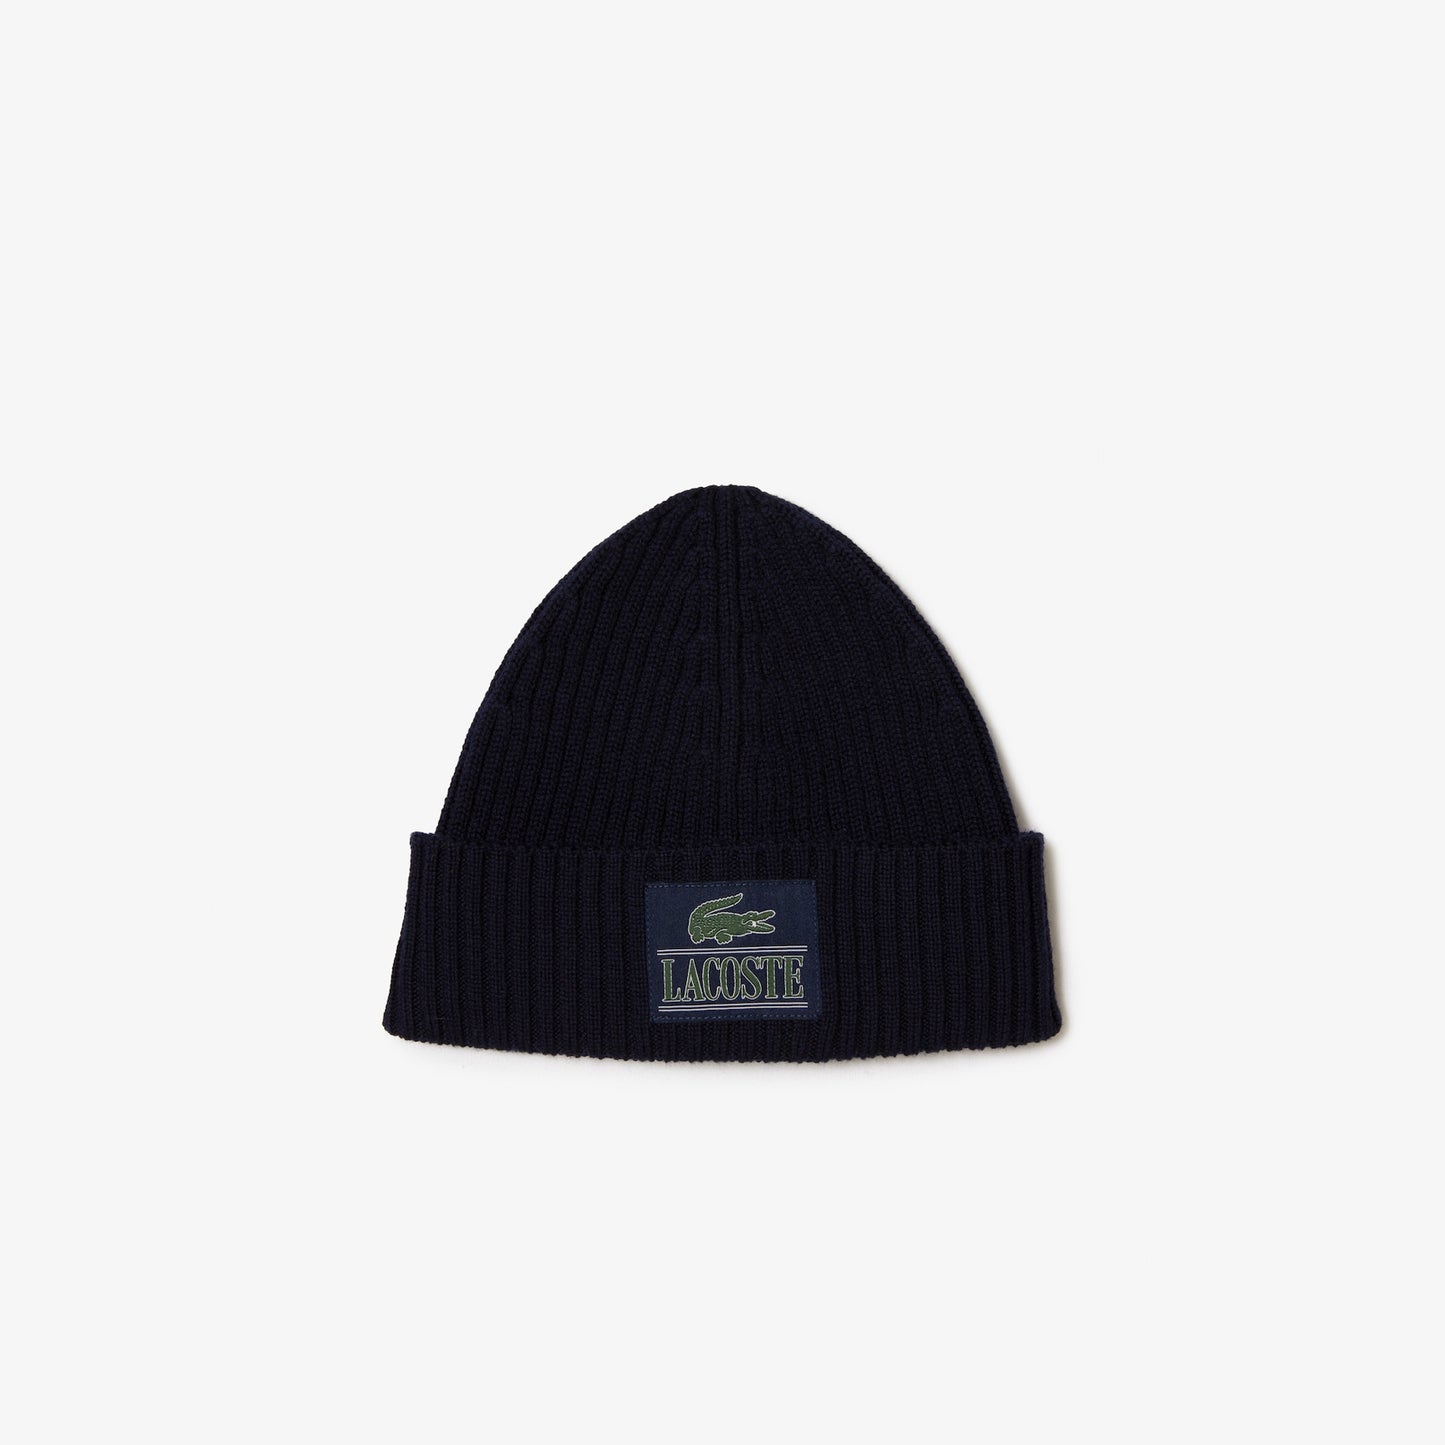 Lacoste - Ribbed Wool Woven Patch Beanie - Black